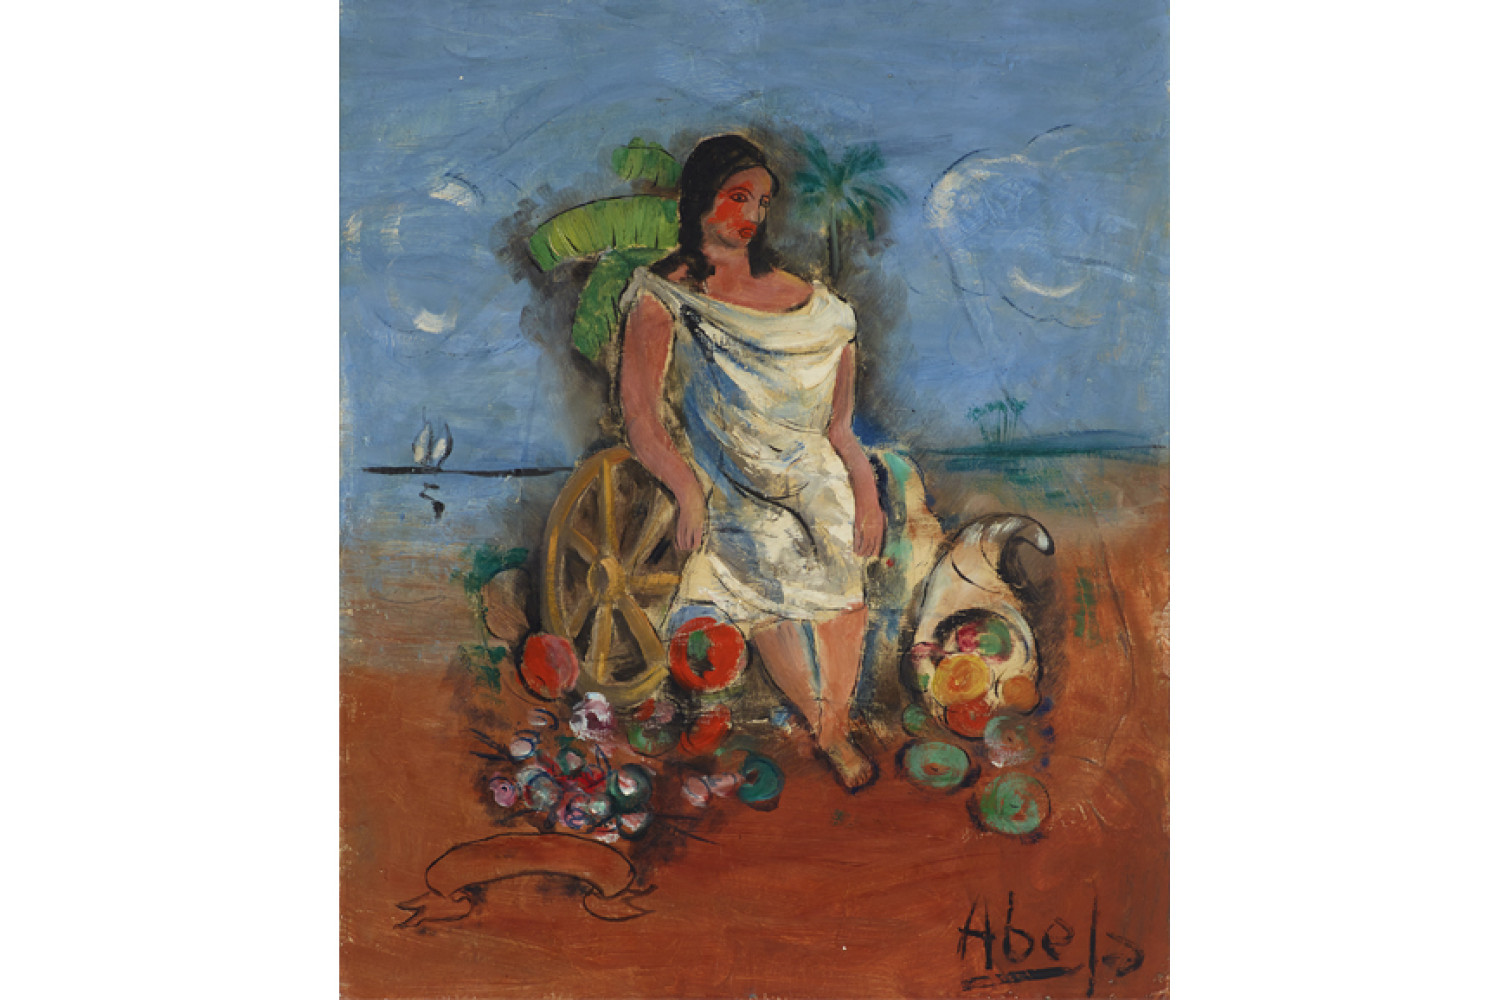 Mujer (Woman), Late 1920s, by Eduardo Abela (Cuban, 1889 - 1965); Oil on canvas; 32 x 27 5/8 inches; Courtesy of the Lowe Art Museum, University of Miami. 